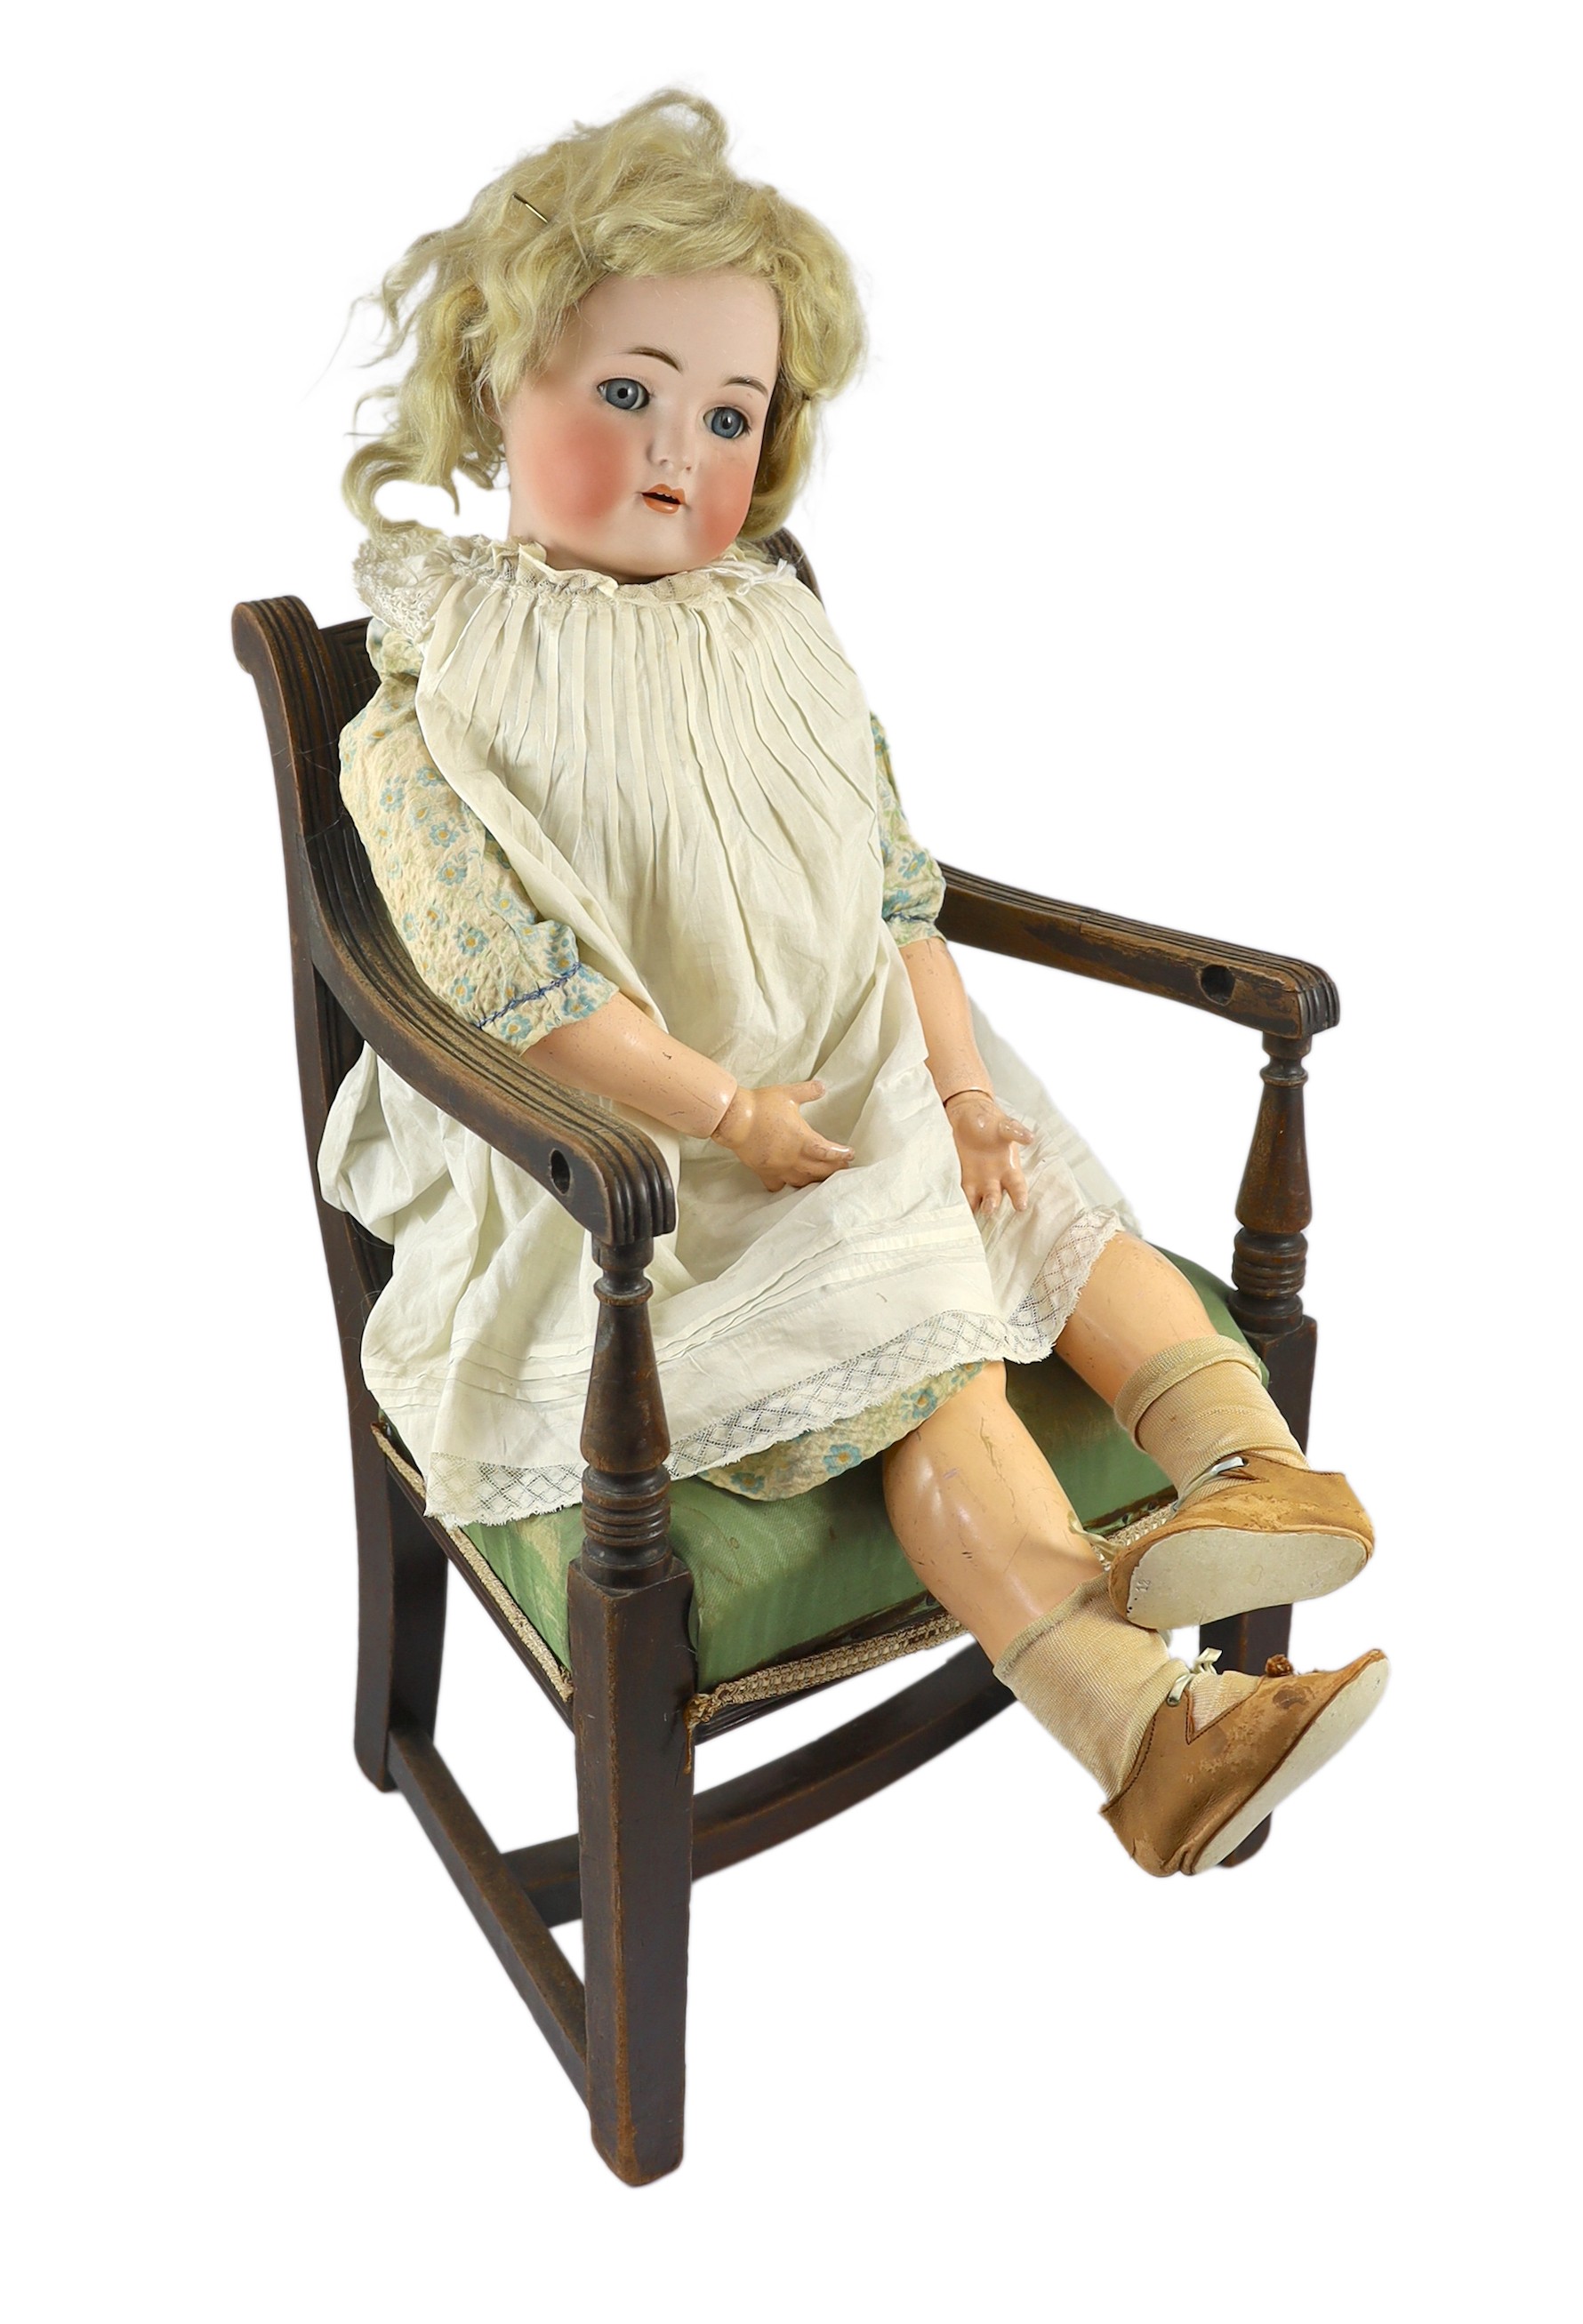 A Kammer & Reinhardt / Simon & Halbig bisque doll, German, circa 1892, 31in. Please note the chair is for display purposes only.                                                                                            